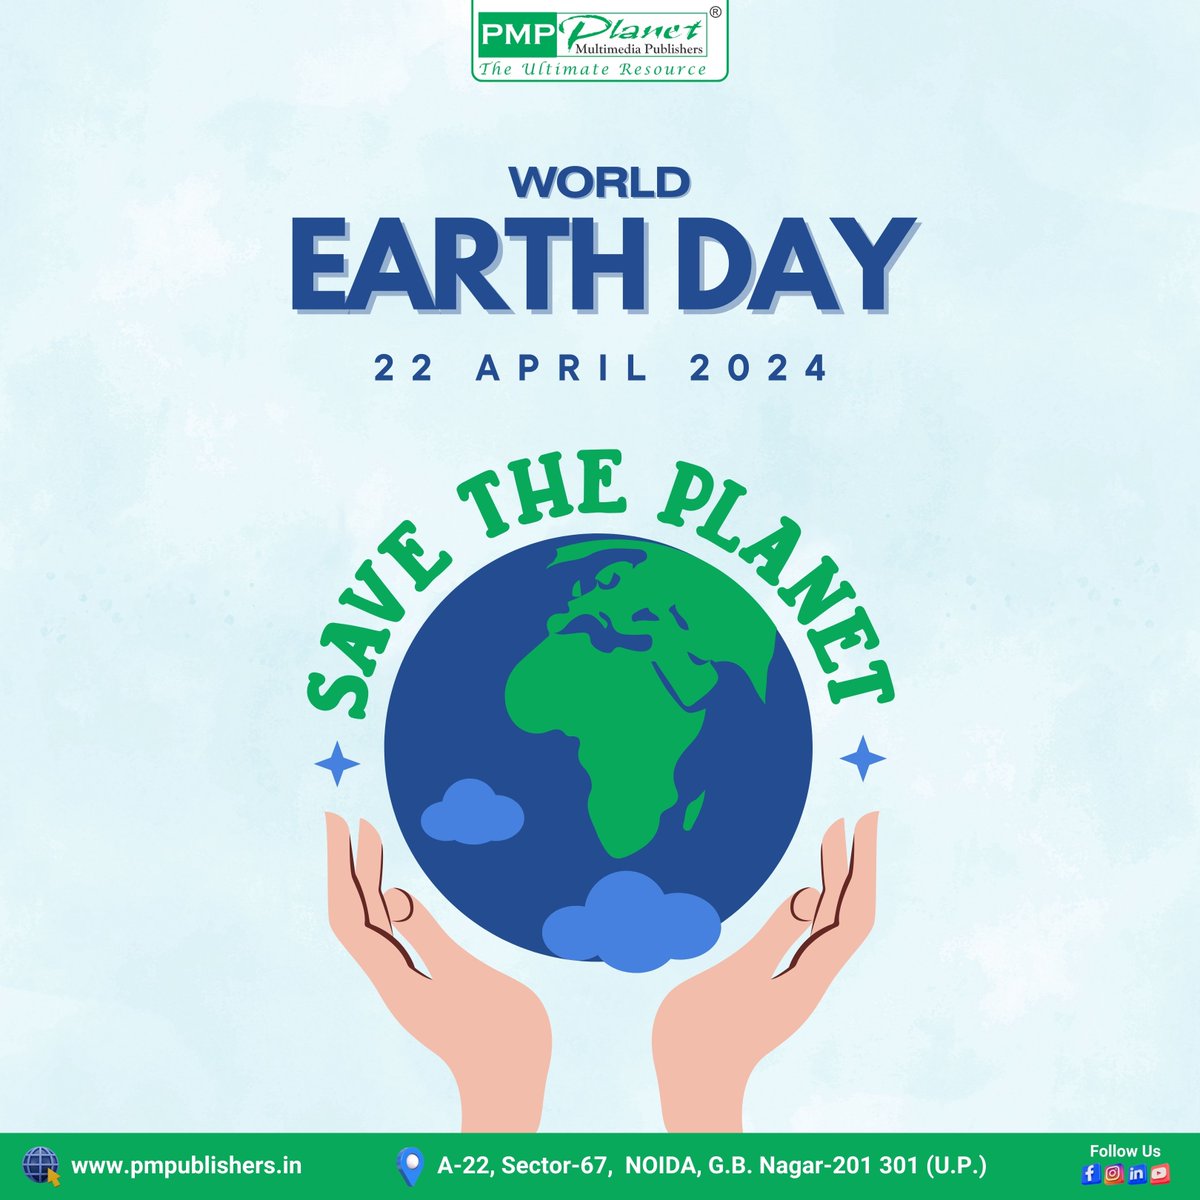 🌍 This Earth Day, let's commit to actions that protect our planet for future generations. Every small effort counts! 🌱 
.
#EarthDay2024 #savetheplanet #pmpublishers #ACTFOREARTH #ecofriendly #SustainableLiving #GoGreen2024 #ClimateAction #earthdayeveryday #protectourplanet